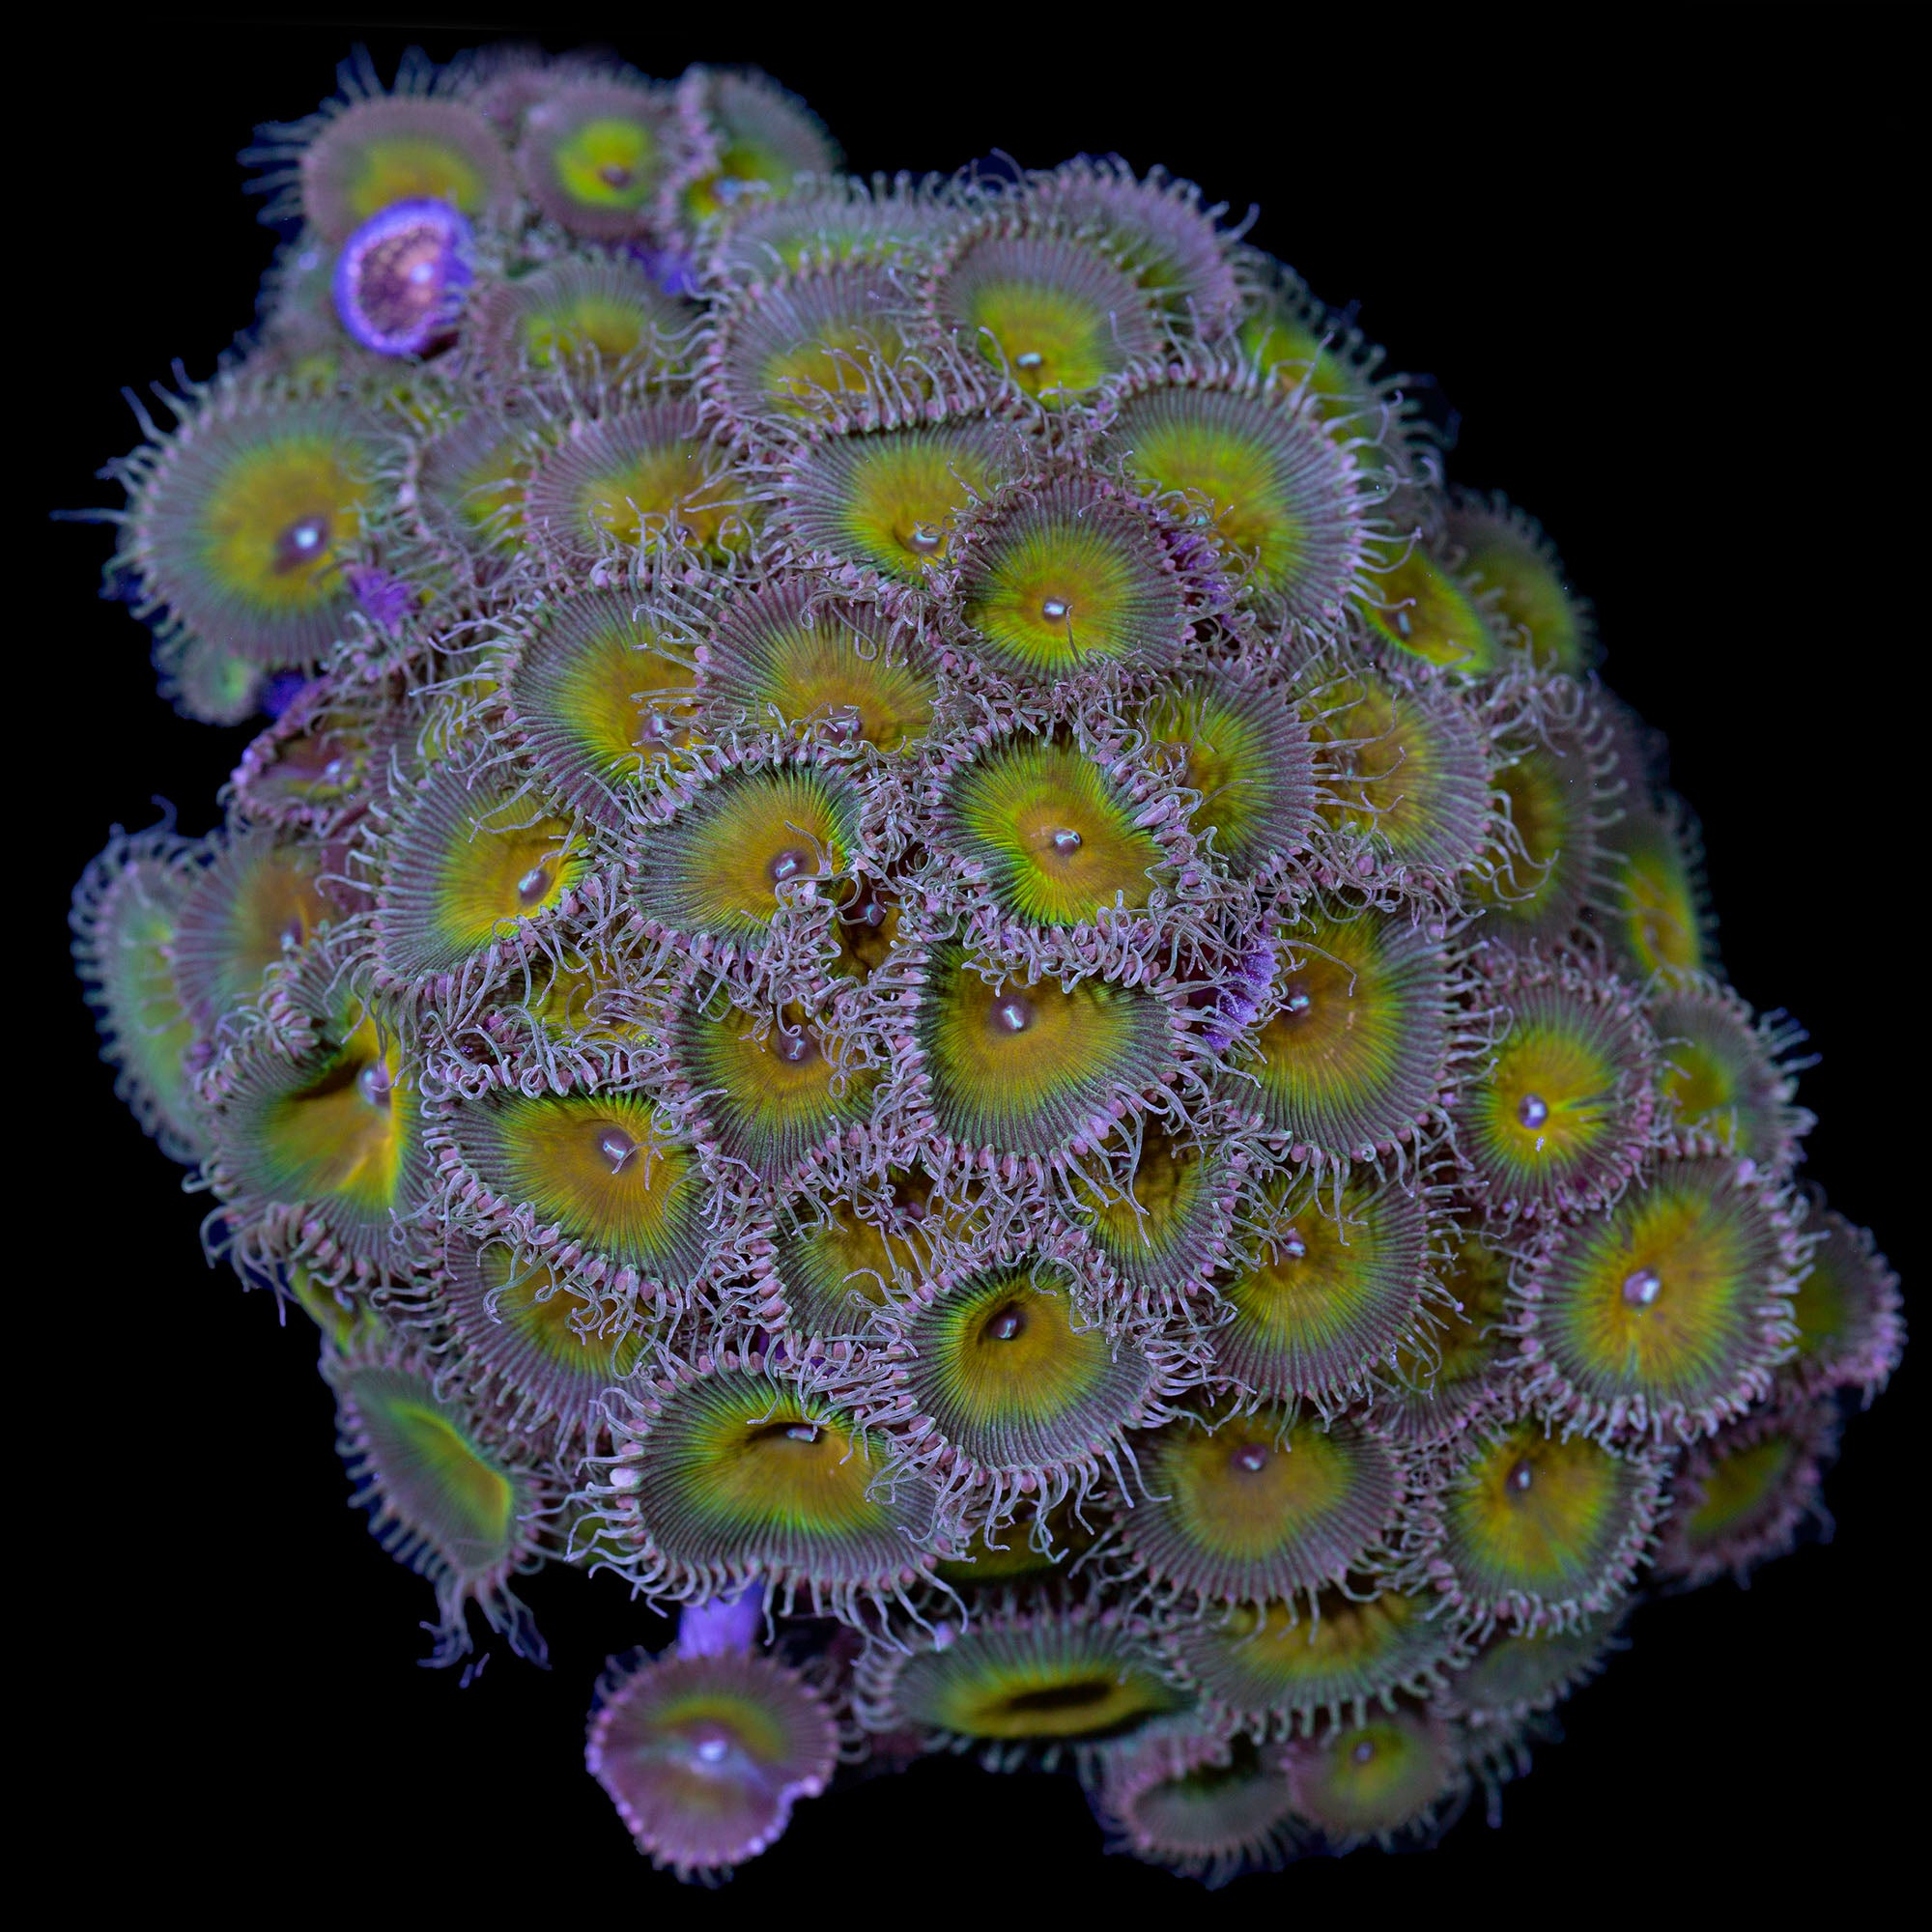 Nuclear Green Zoanthid Colony